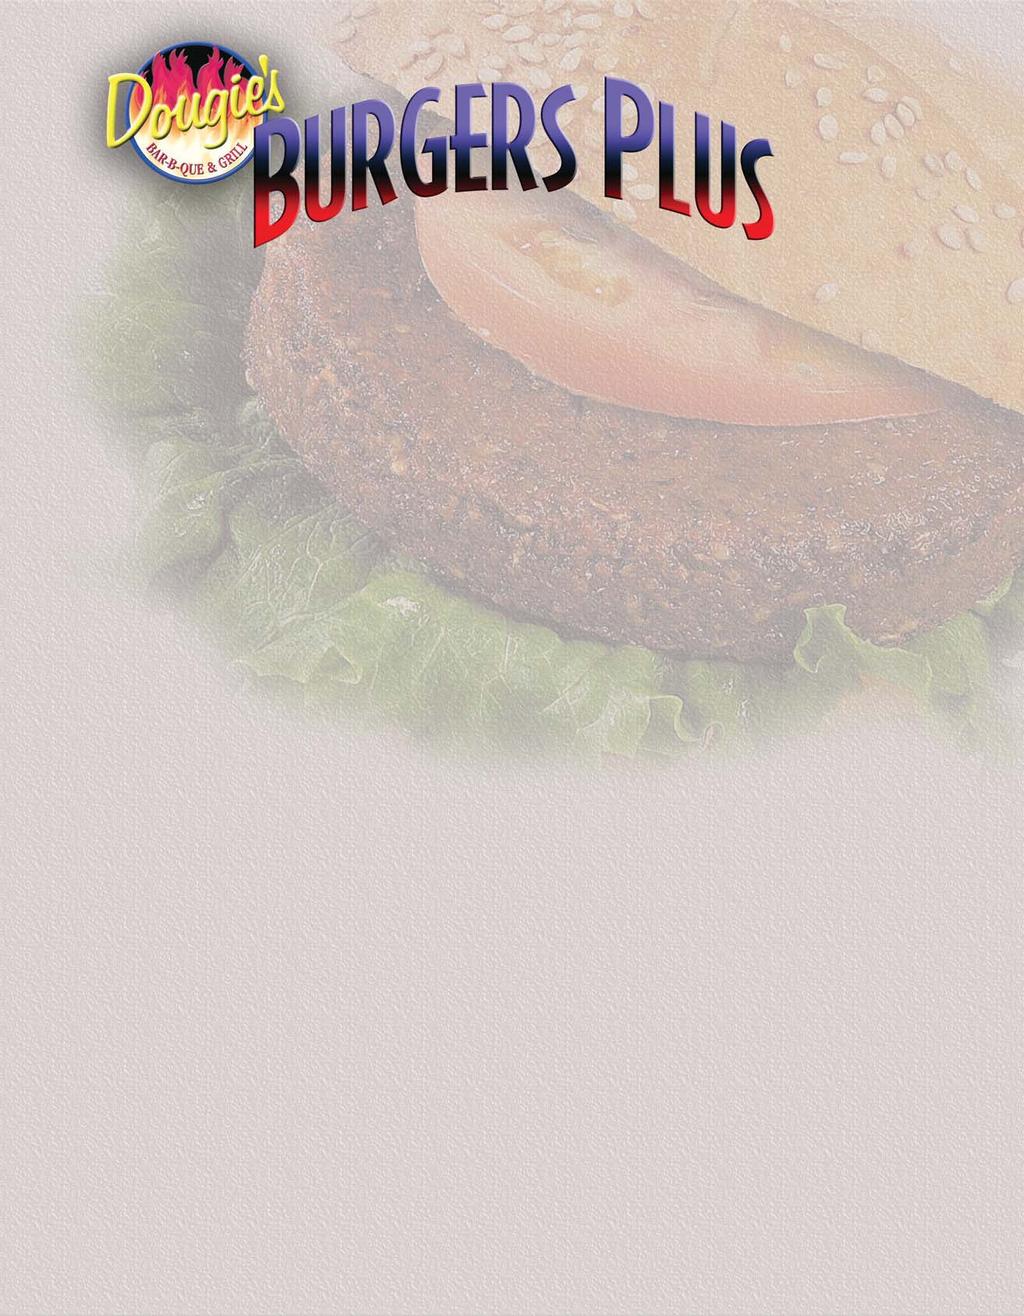 OUR BURGERS All Burgers Served on a Bun with Lettuce, Tomato, Pickle, Onions and our Special Sauce, with a Side Order of French Fries or Baked Potato Served on Garlic Bread add $1.50 BEEF BURGER $12.